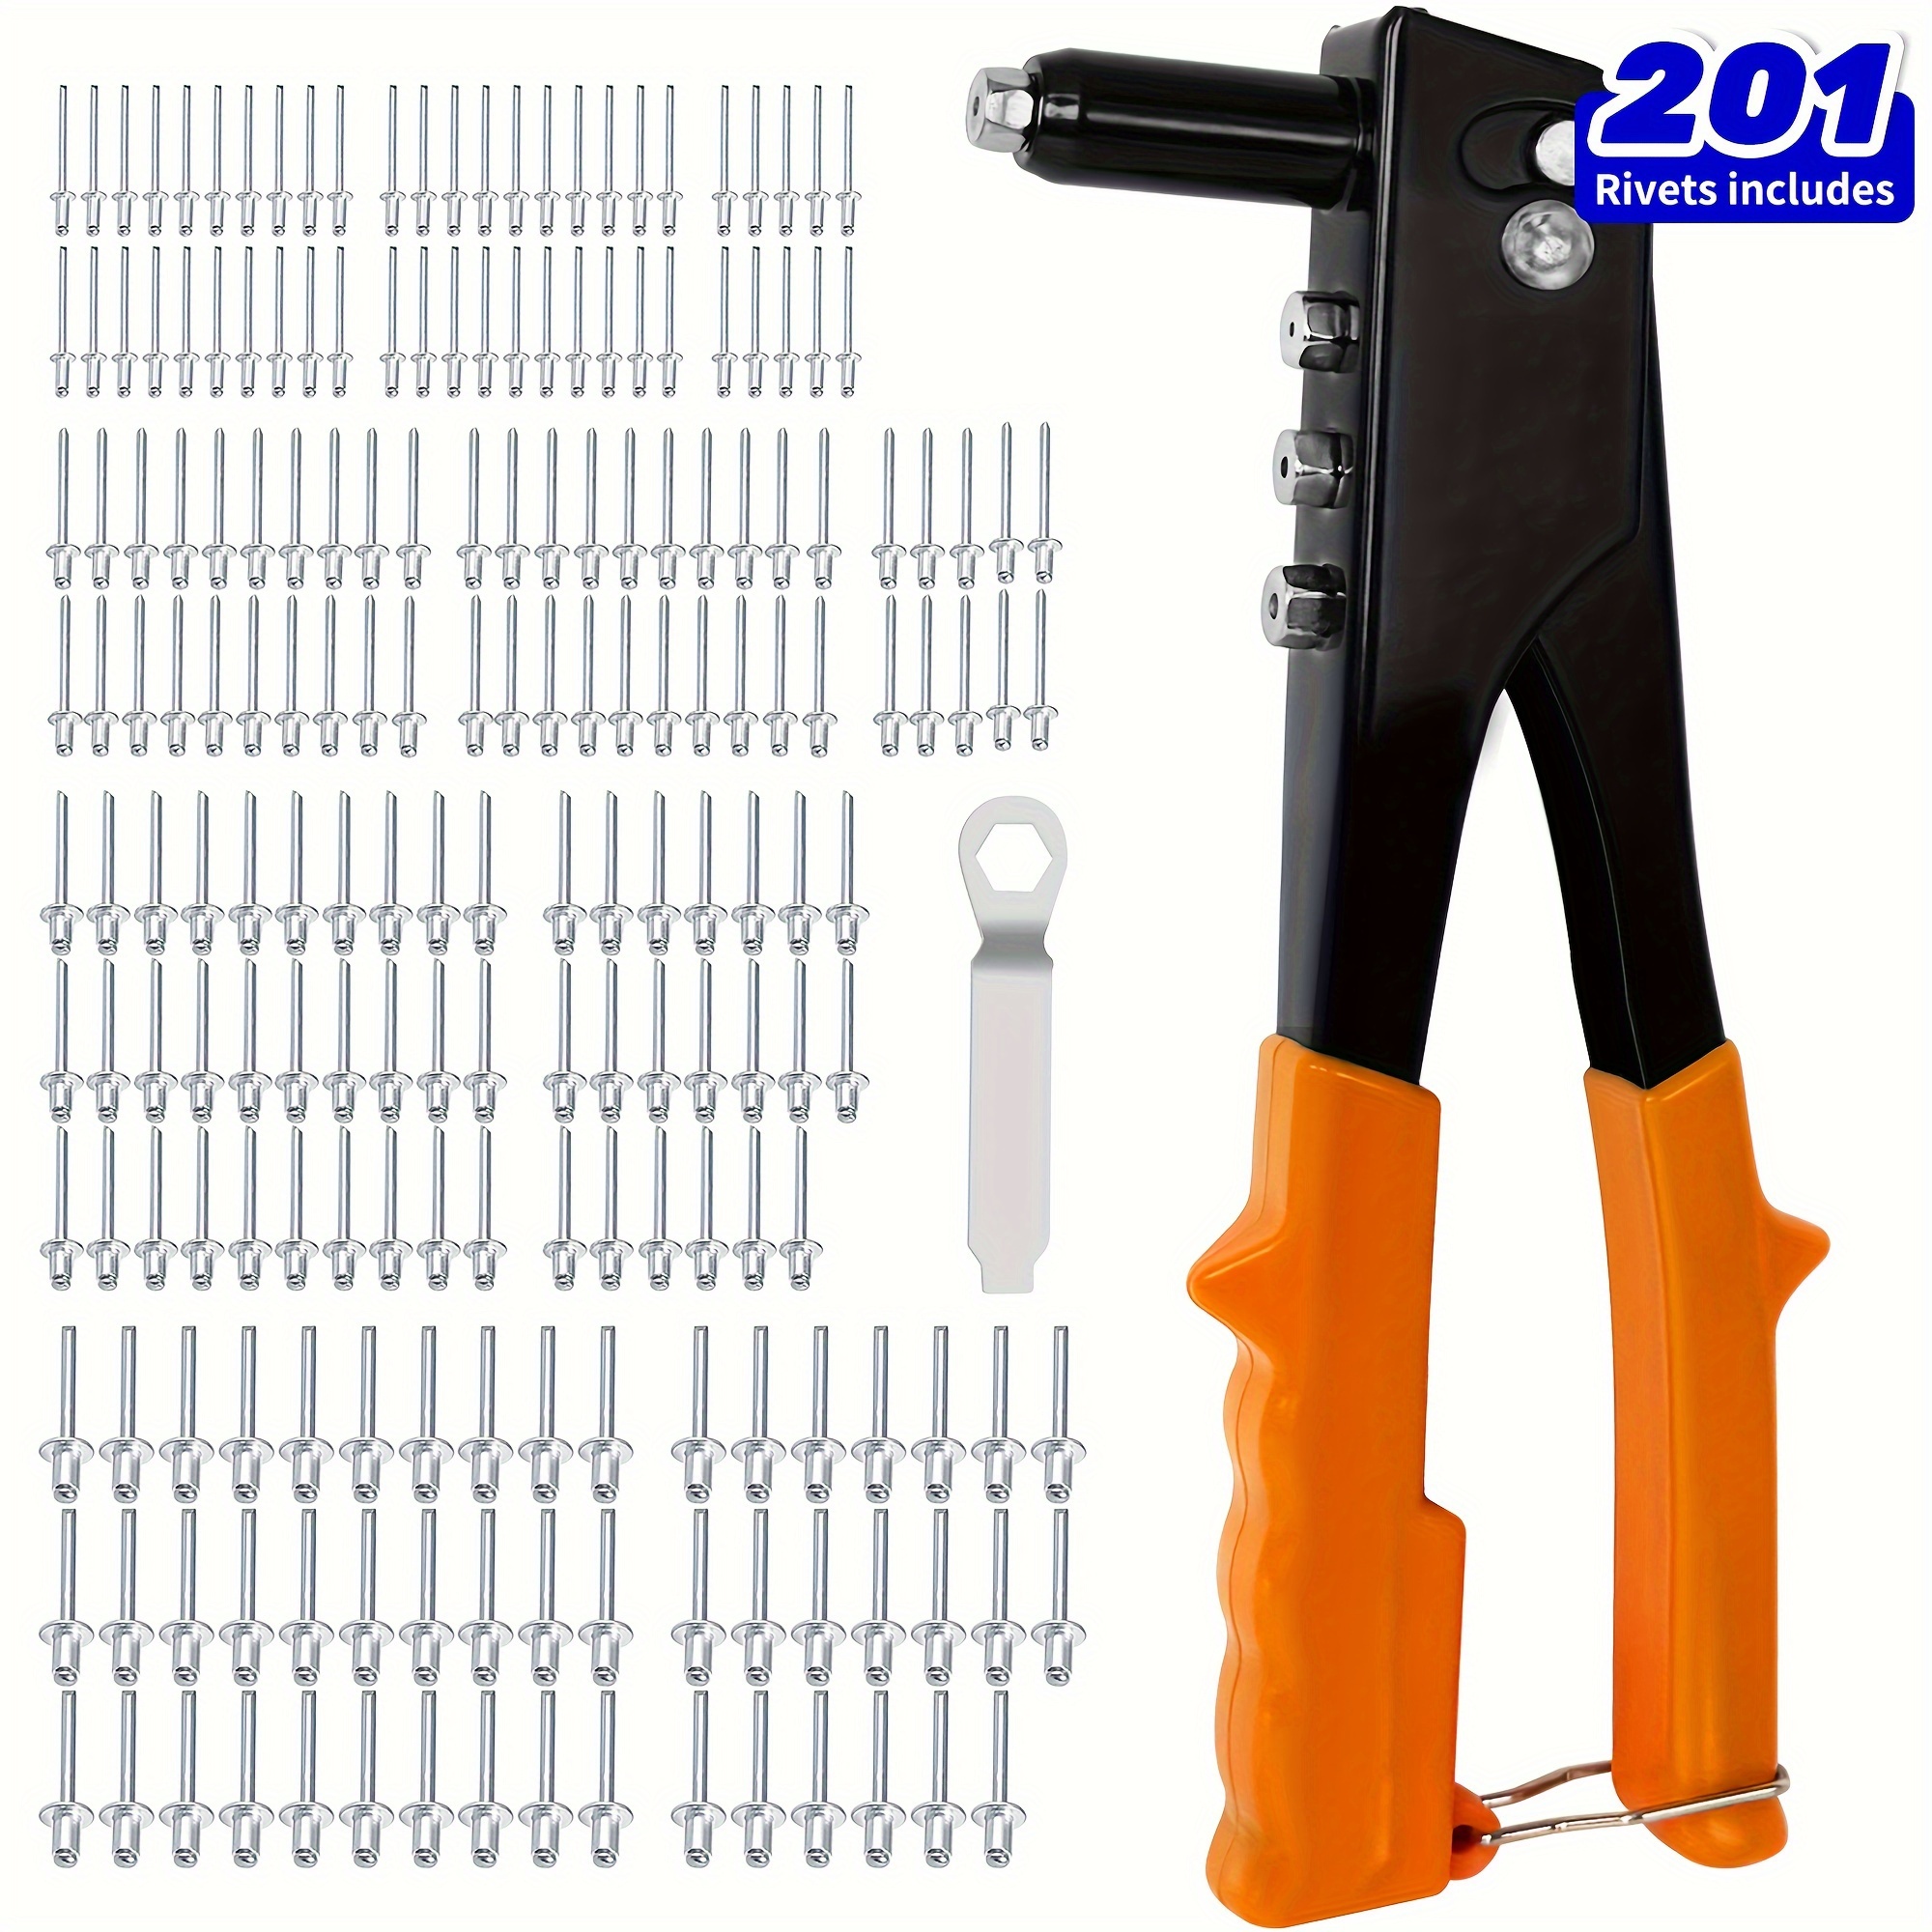 

4-in-1 Hand /rivet Gun, Pop Rivet Tool Kit With 200 Rivets - 3/32-inch, 1/8-inch, 5/32-inch, 3/16-inch, 4 Interchangeable Nosepieces, Suitable For Metal